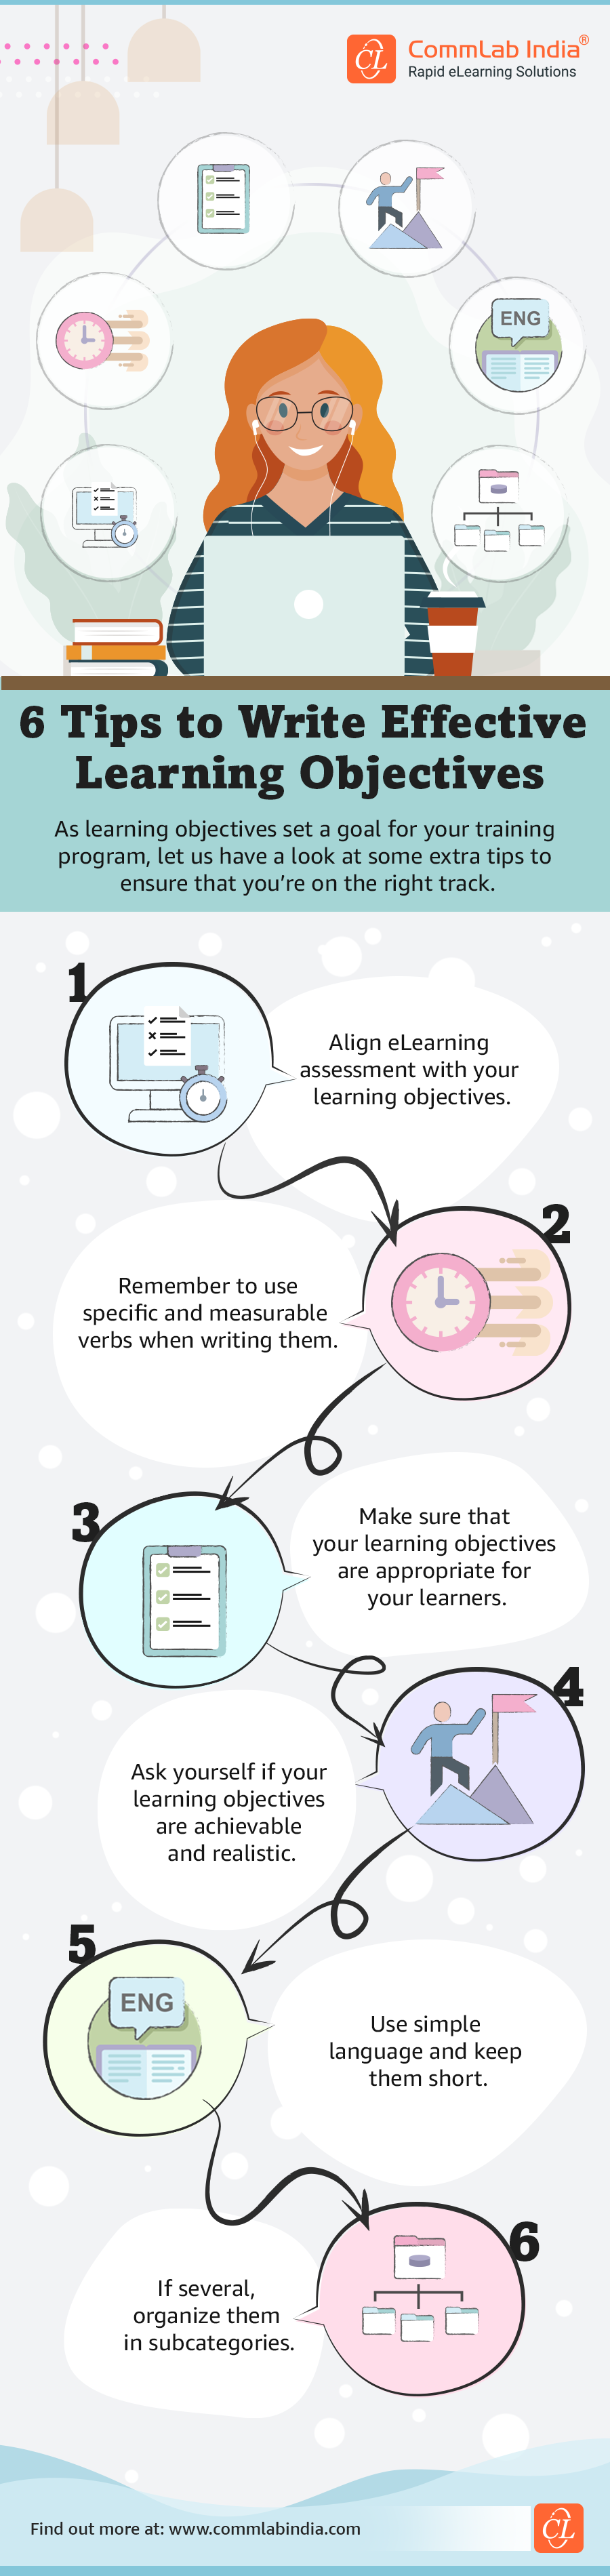 Tips to Frame Effective Learning Objectives